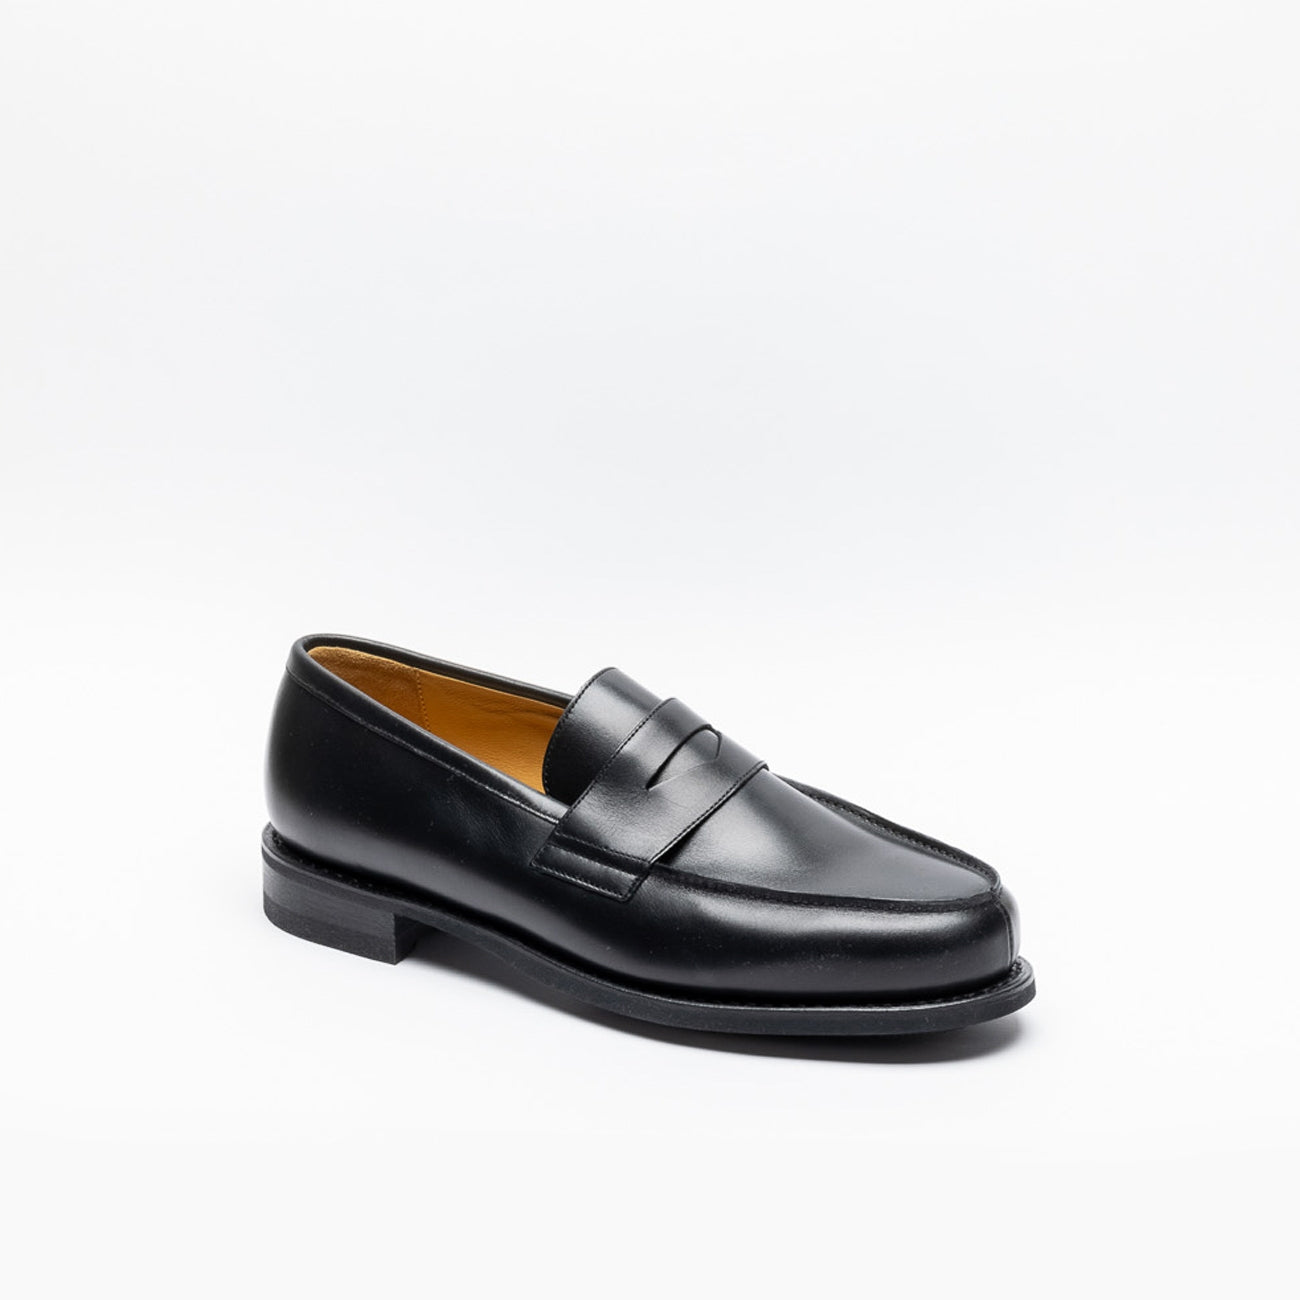 Paraboot black calf penny loafer